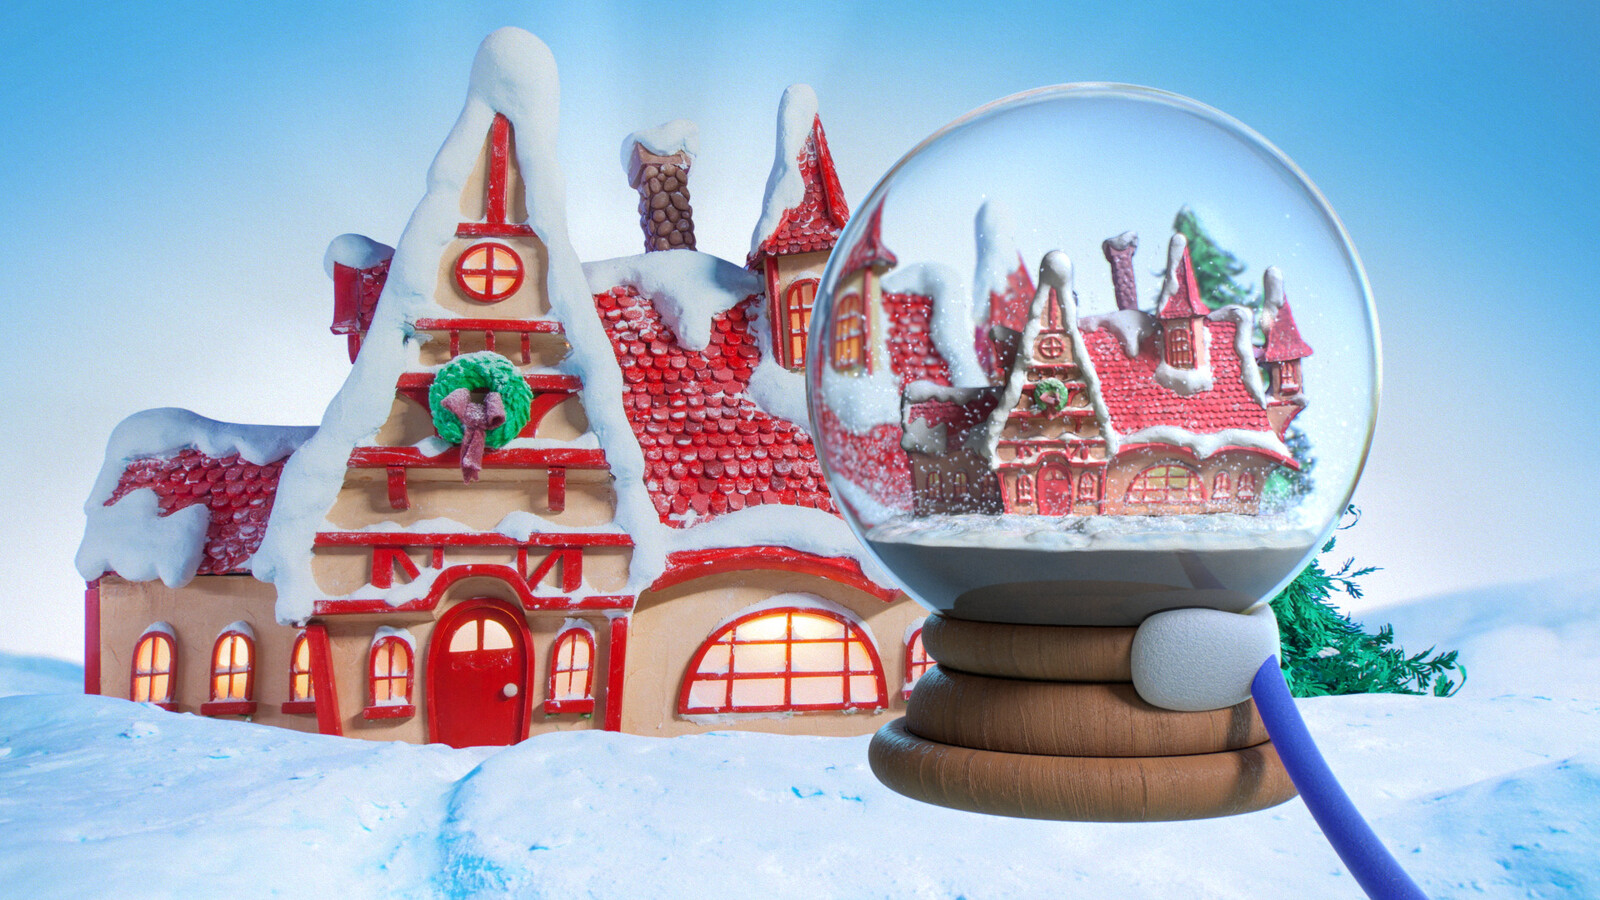 The director wanted a perfect replica of the practical set inside of the snow globe.